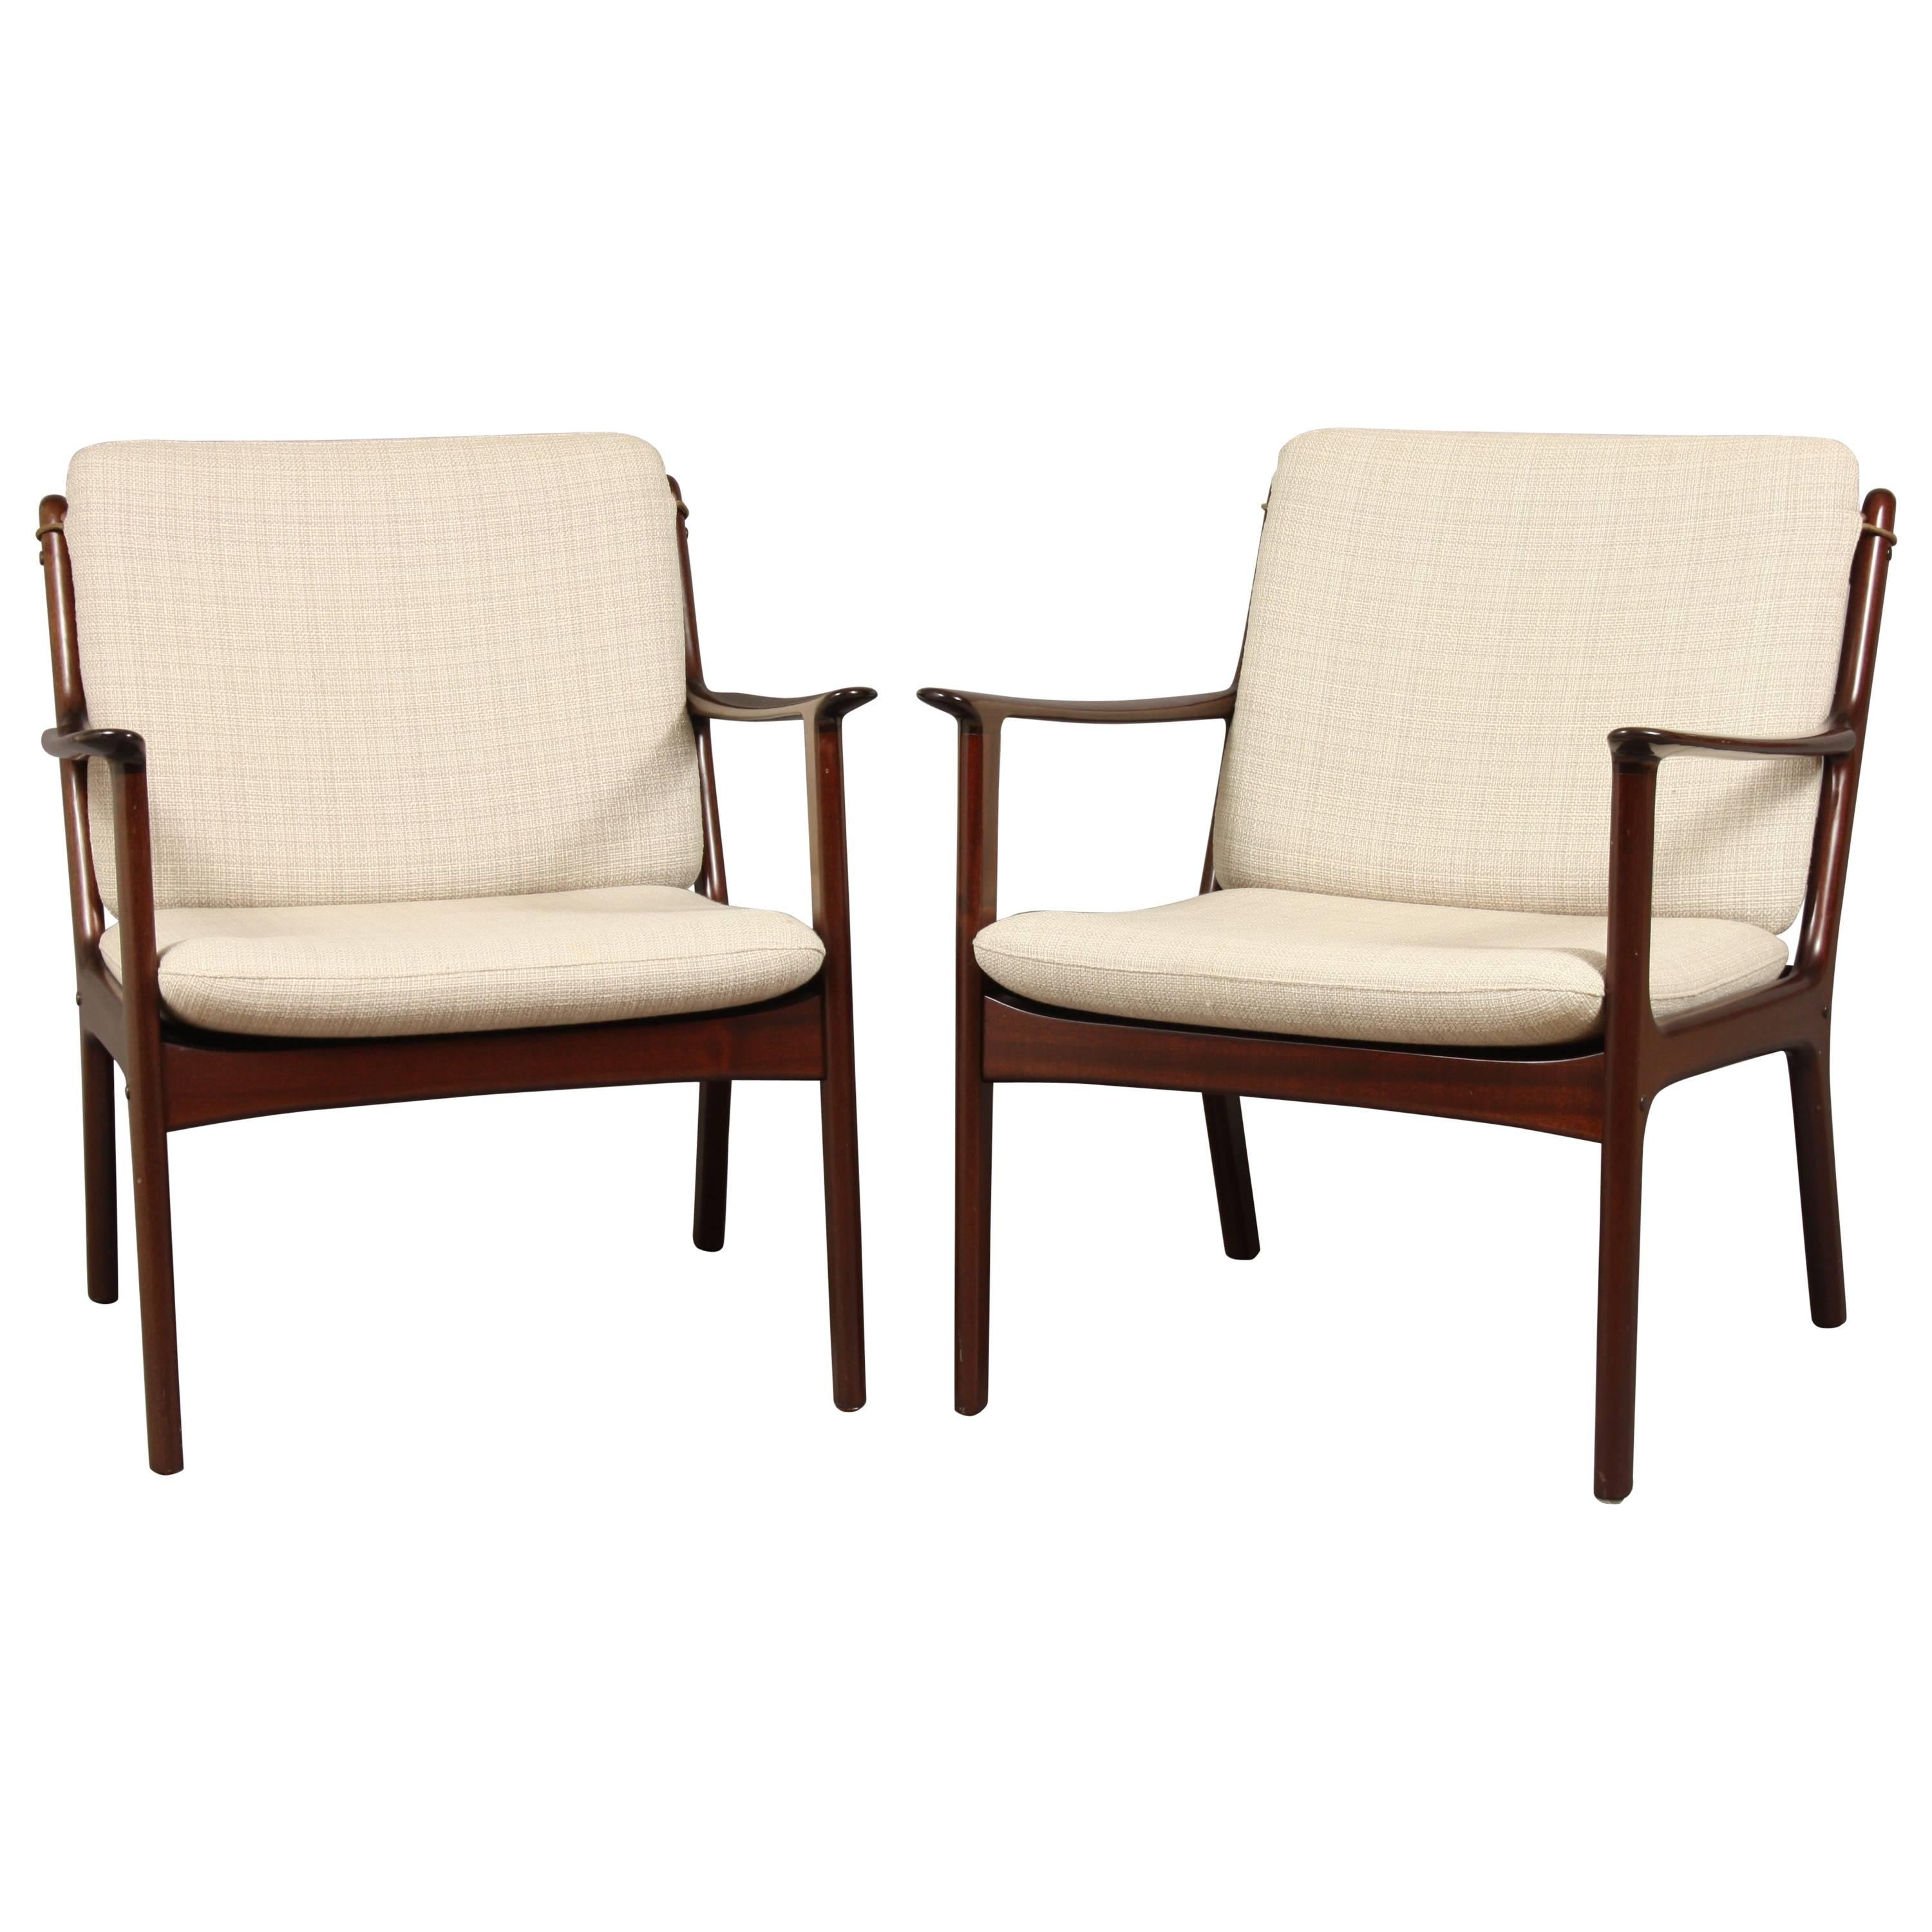 Pair of Ole Wanscher PJ112 Easy Chair in Polished Mahogany